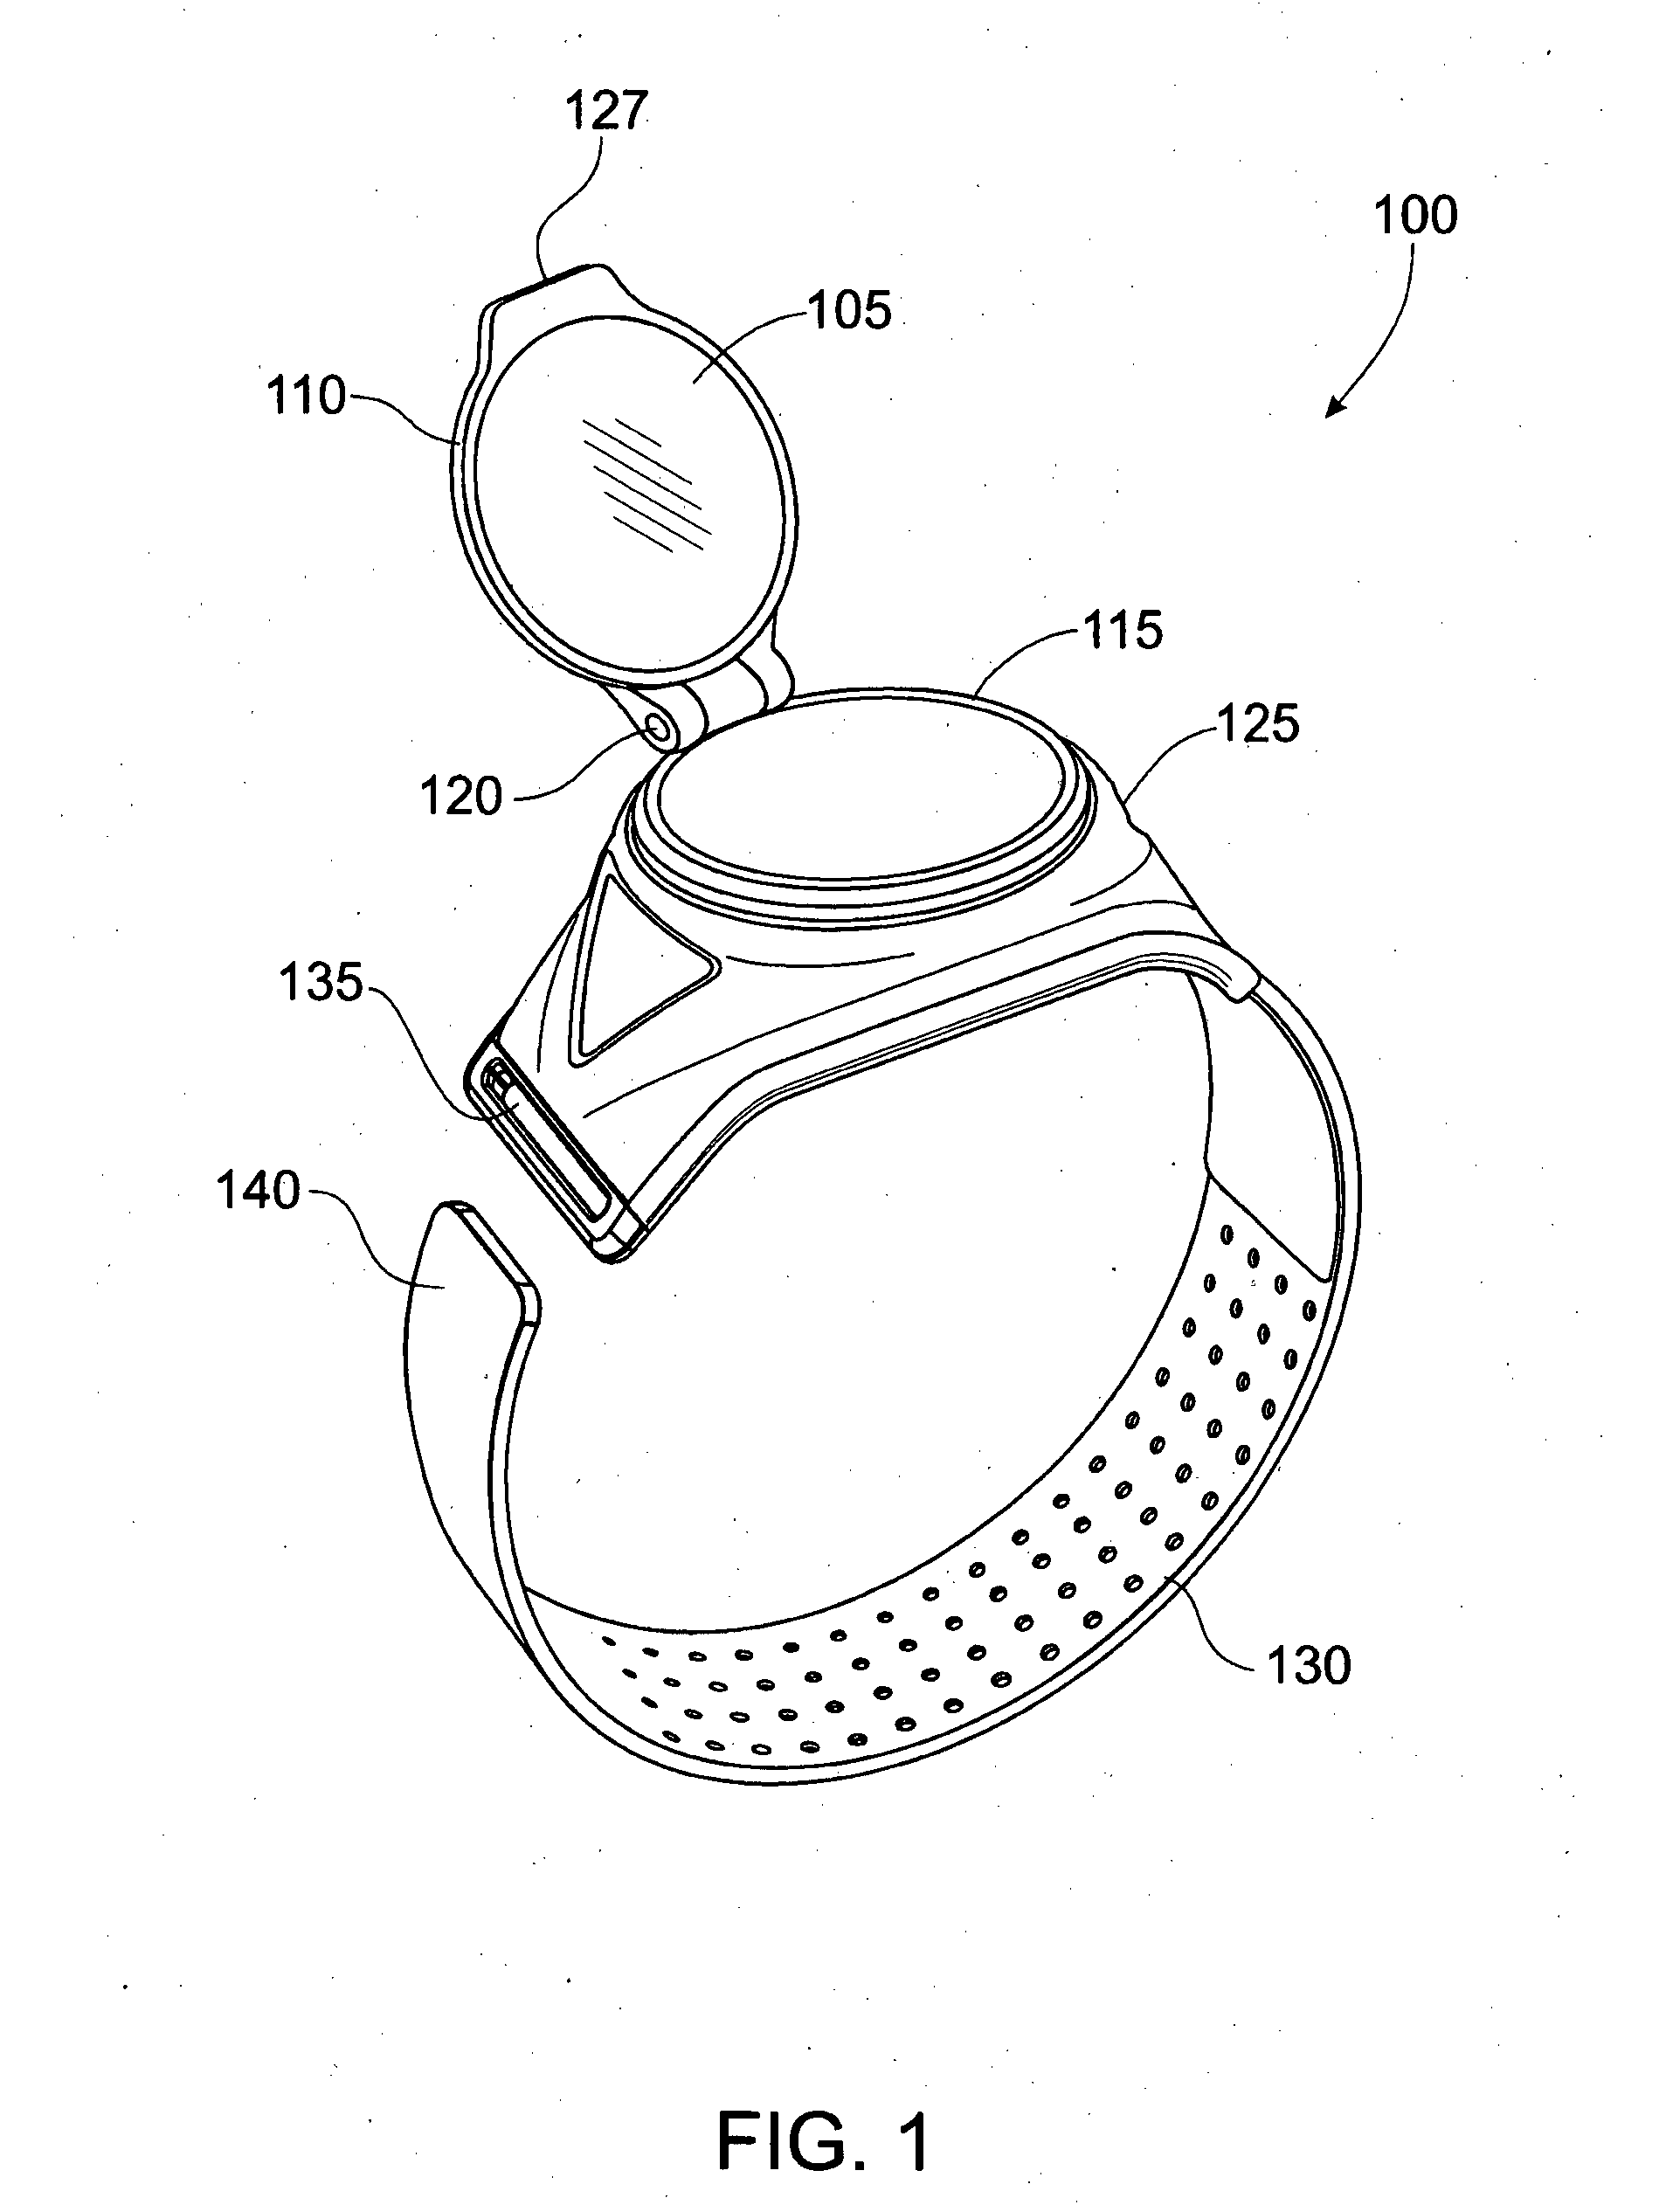 Wearable Reflective Device